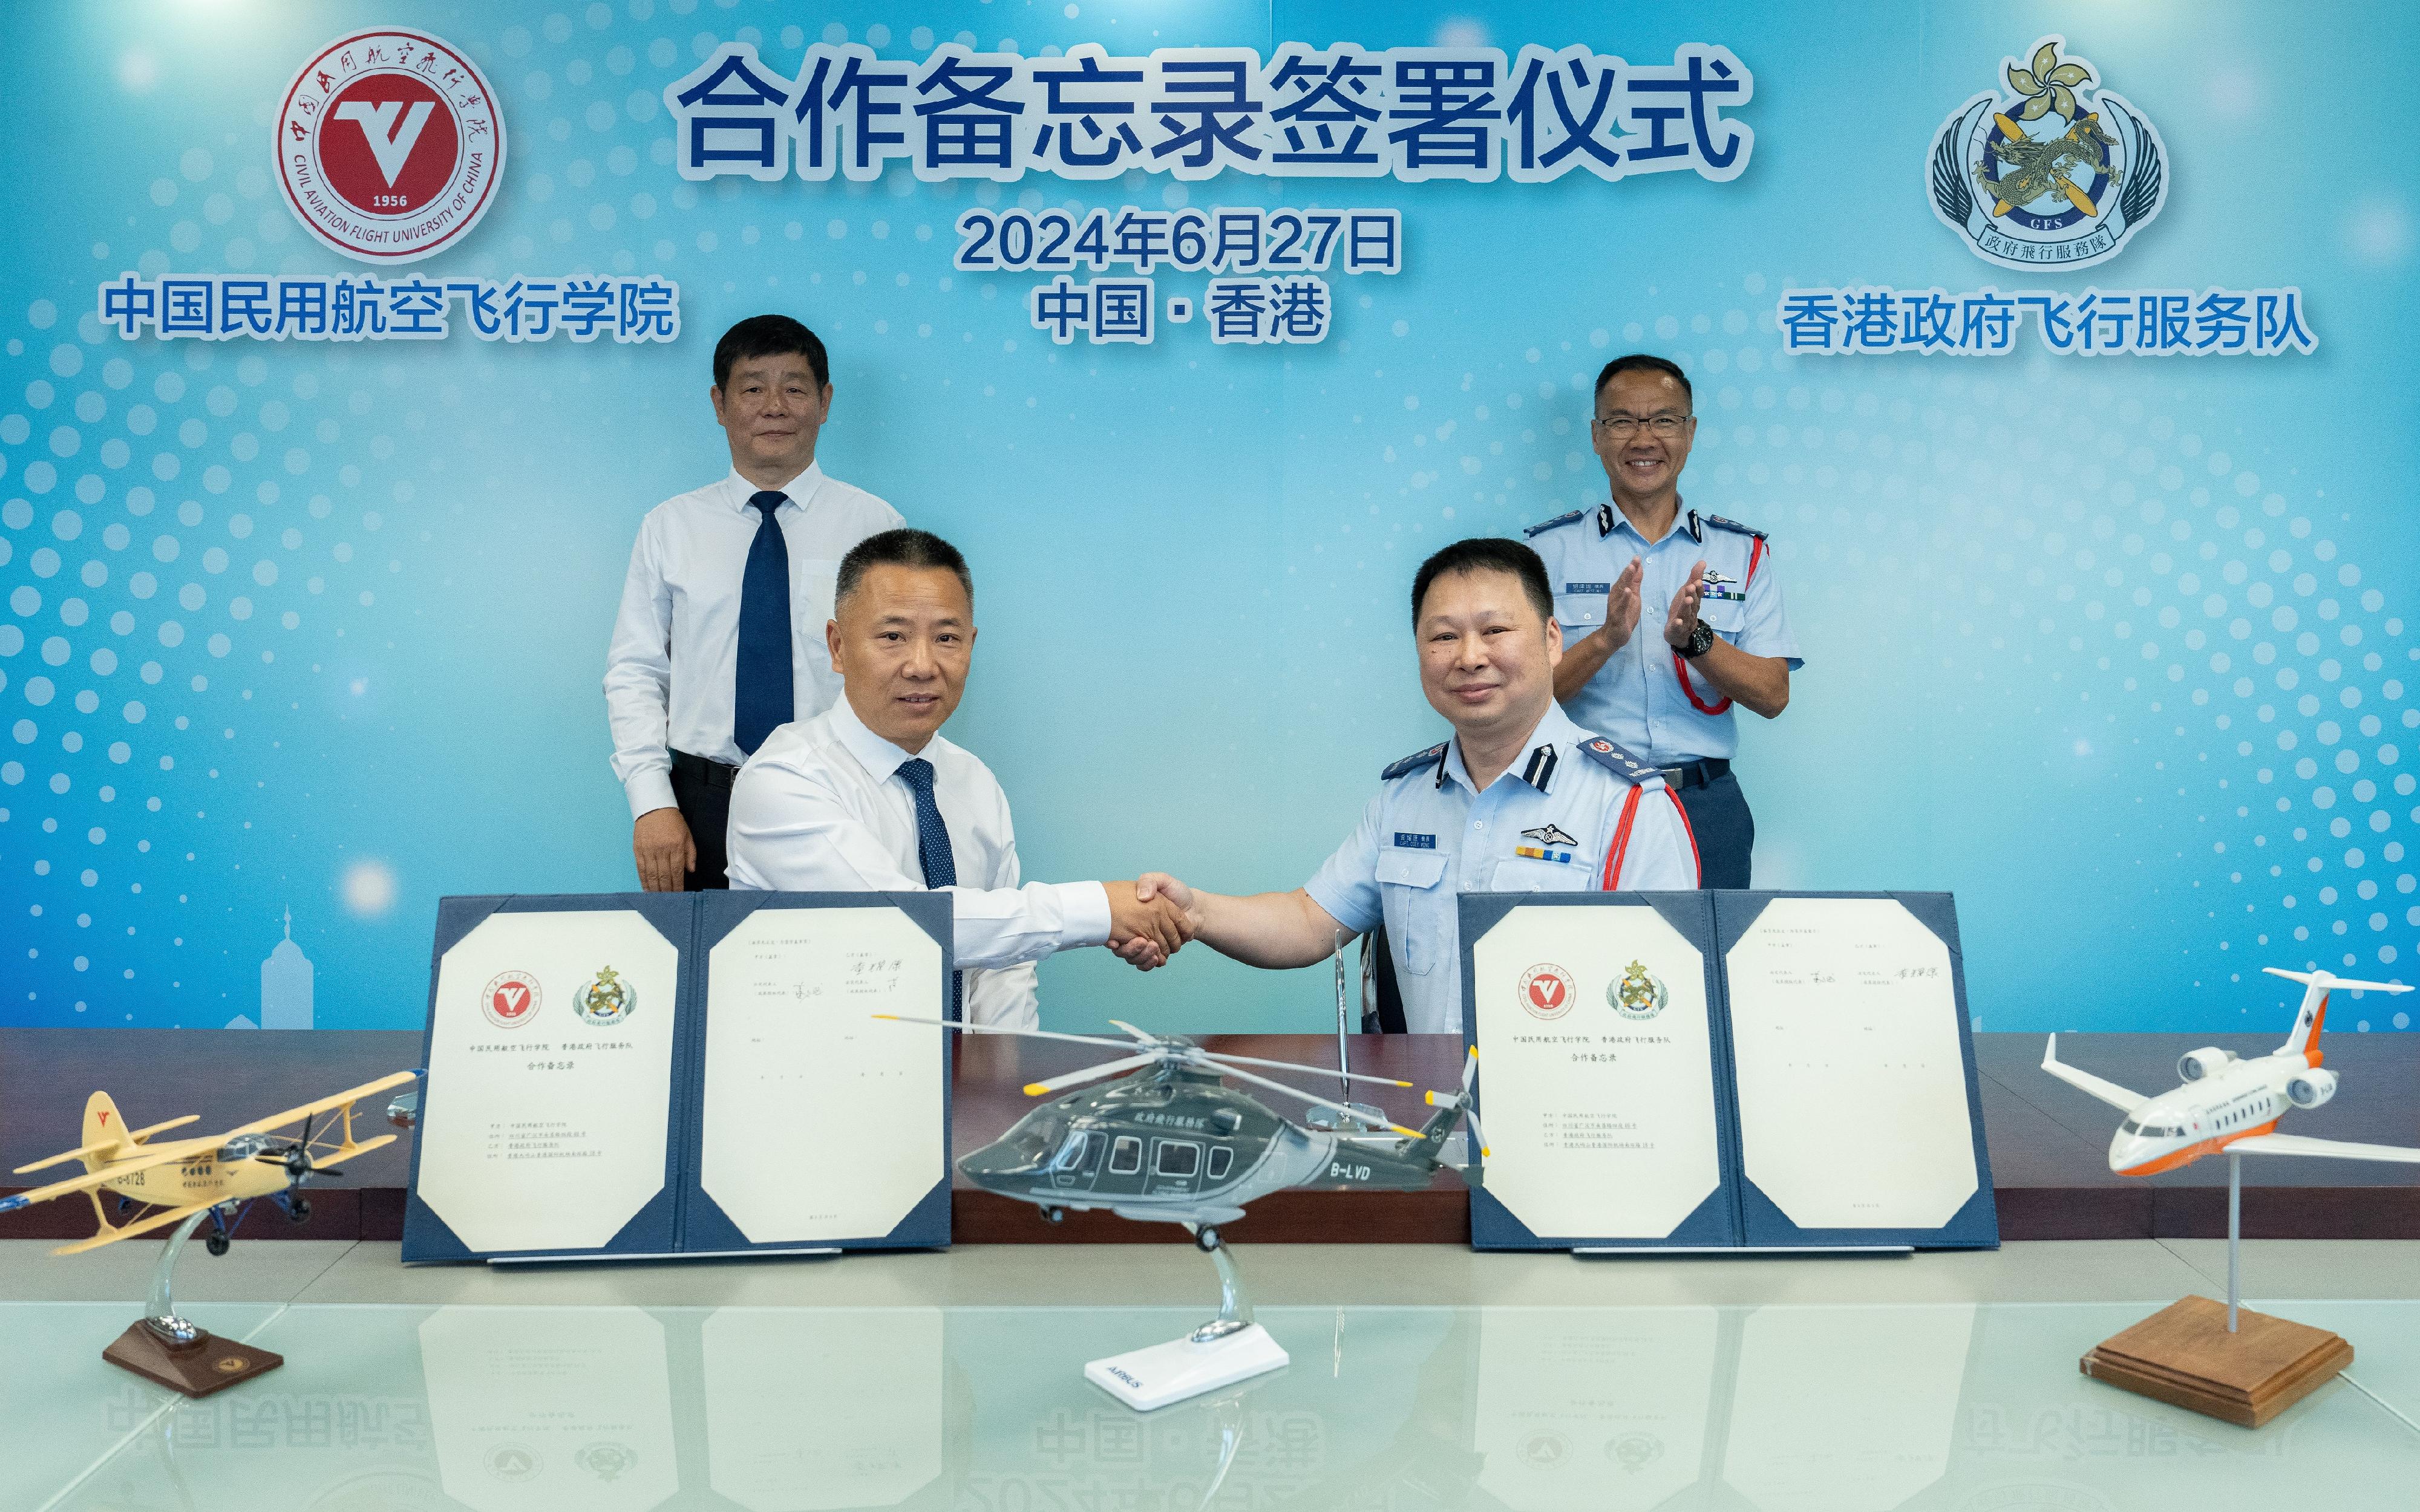 The Government Flying Service (GFS) and the Civil Aviation Flight University of China (CAFUC) signed a memorandum of understanding (MOU) today (June 27) to underpin closer collaboration. Witnessed by the Controller of the GFS, Captain West Wu (back, right), and Vice-President of the CAFUC Mr Ouyang Ting (back, left), the MOU was signed by the Chief Pilot (Training and Standards) of the GFS, Captain Wong Yiu-hong (front, right), and the President of Guanghan Flight College of the CAFUC, Mr Ge Zhibin (front, left).